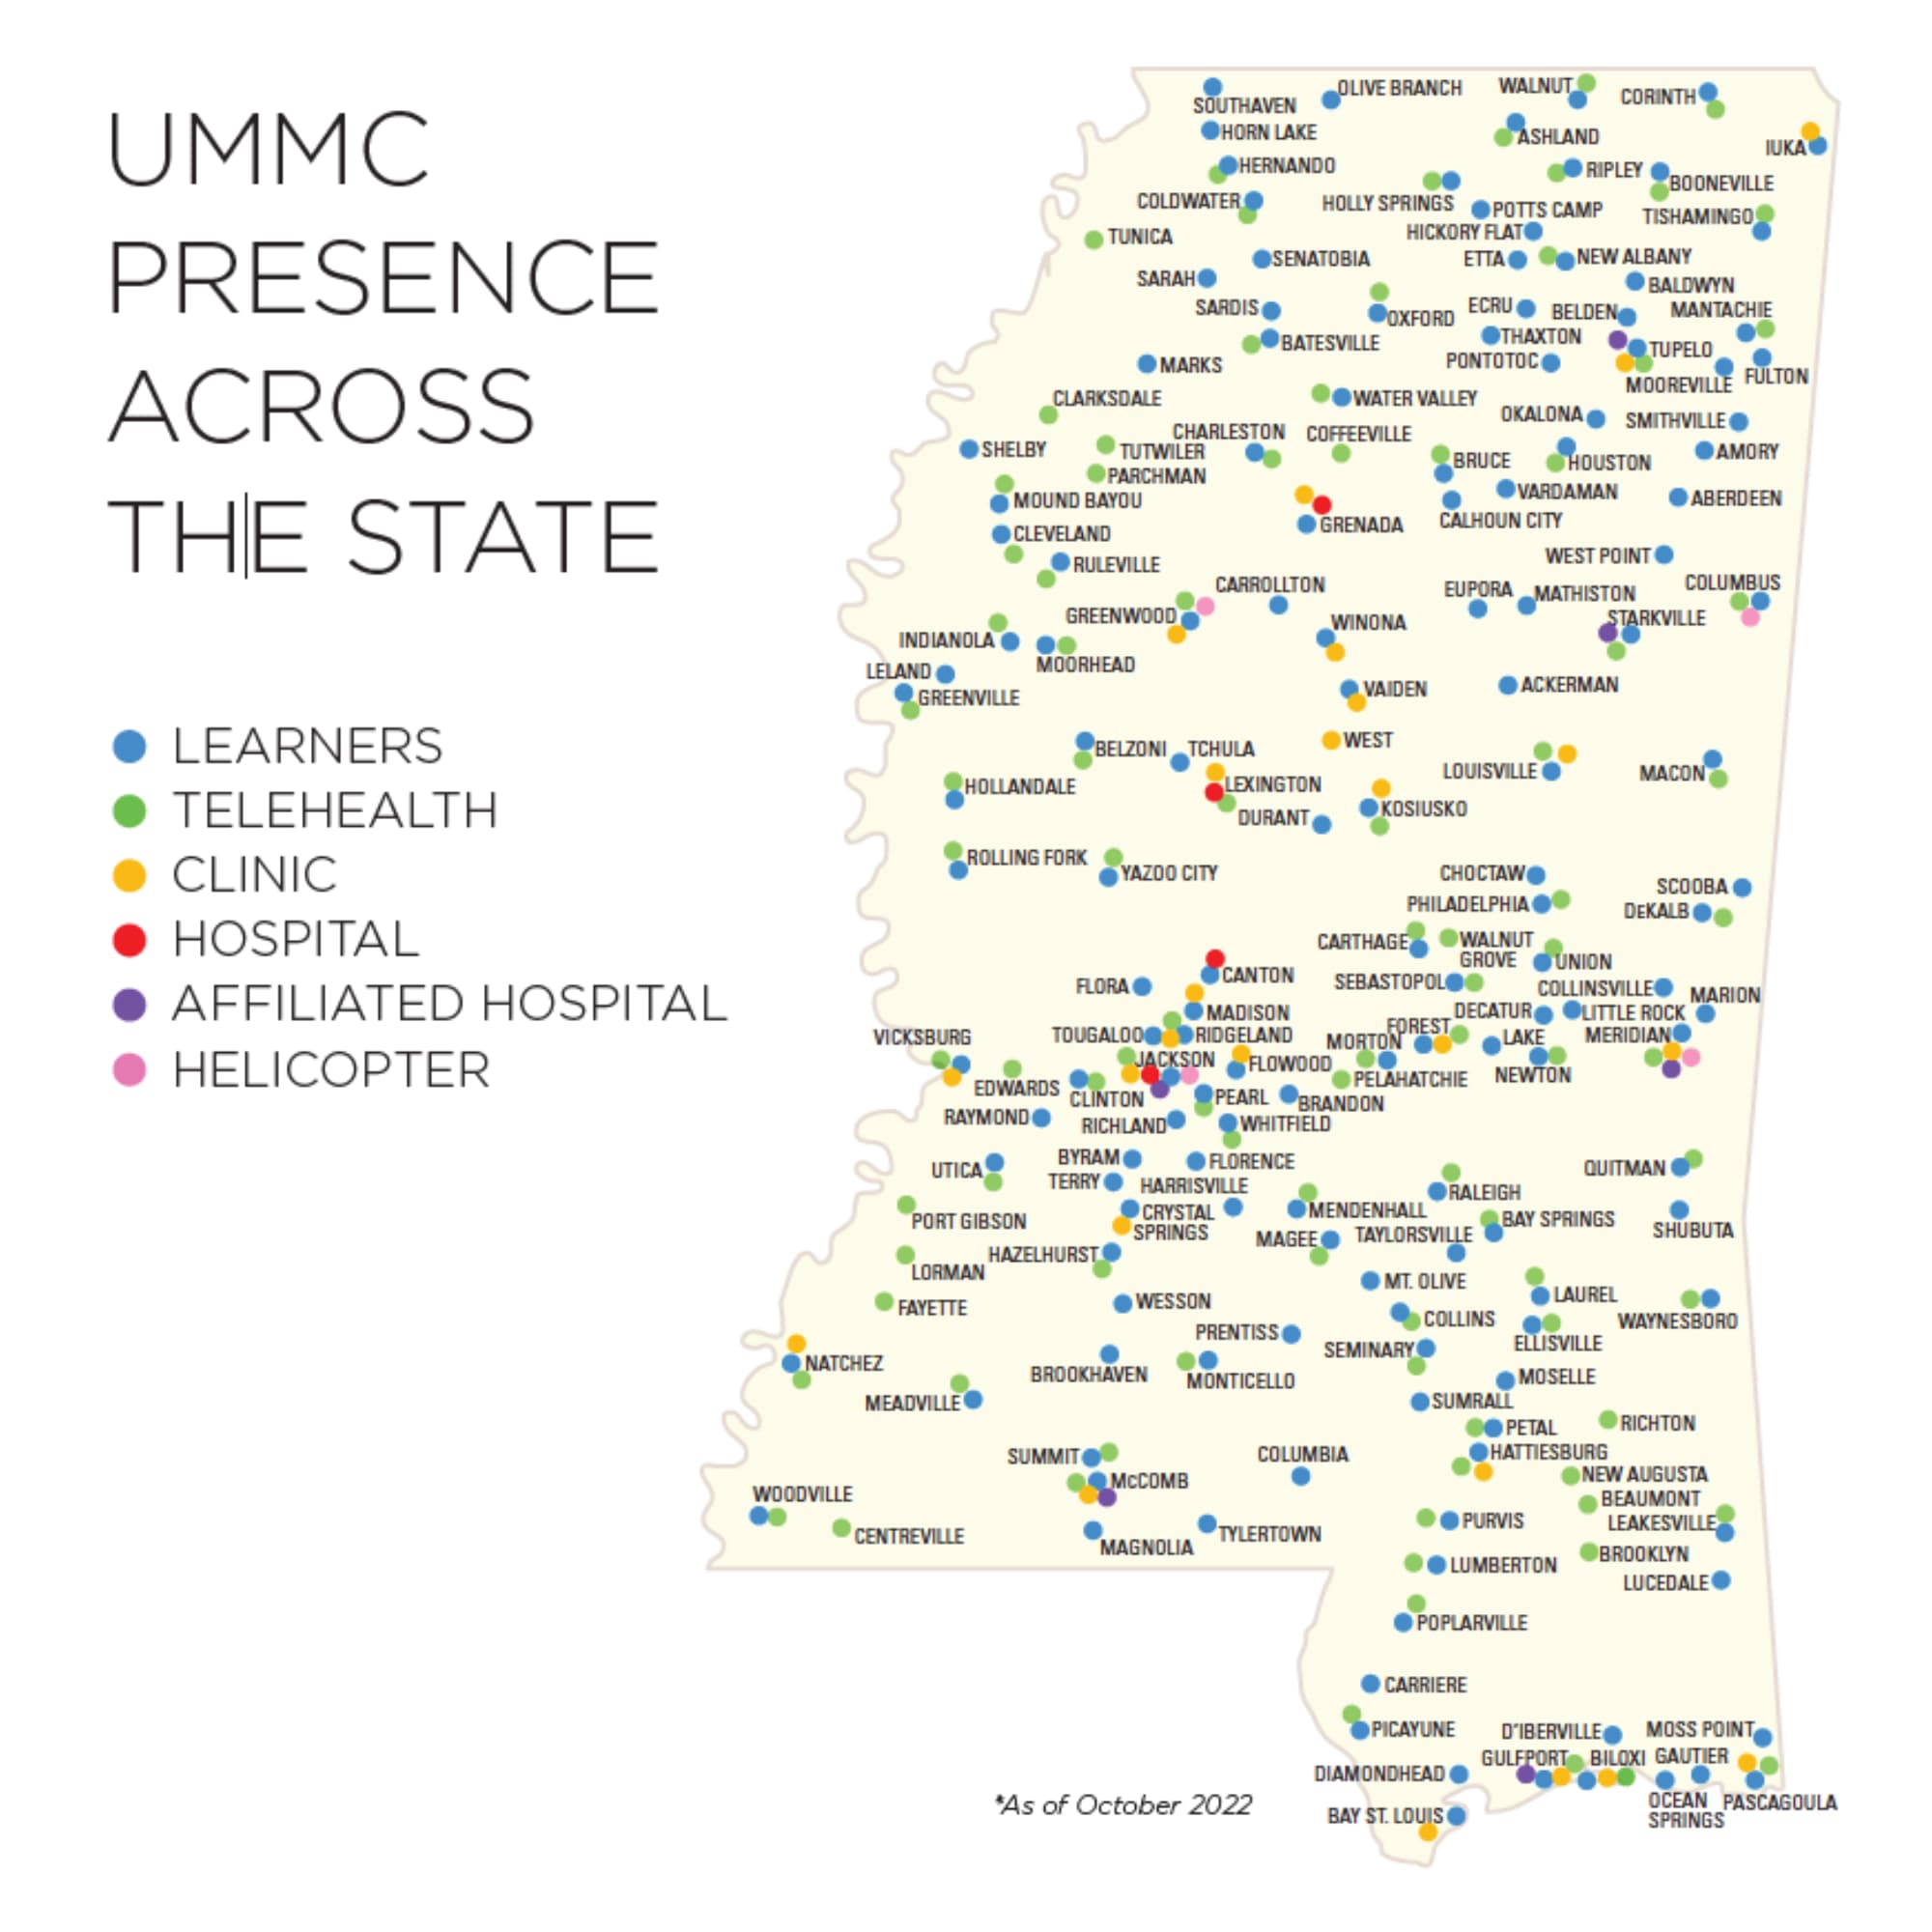 UMMC Presence across the state noted with city names and colored circles for learners, telehealth, clinic, hospital, affiliated hospital, and helicopter.